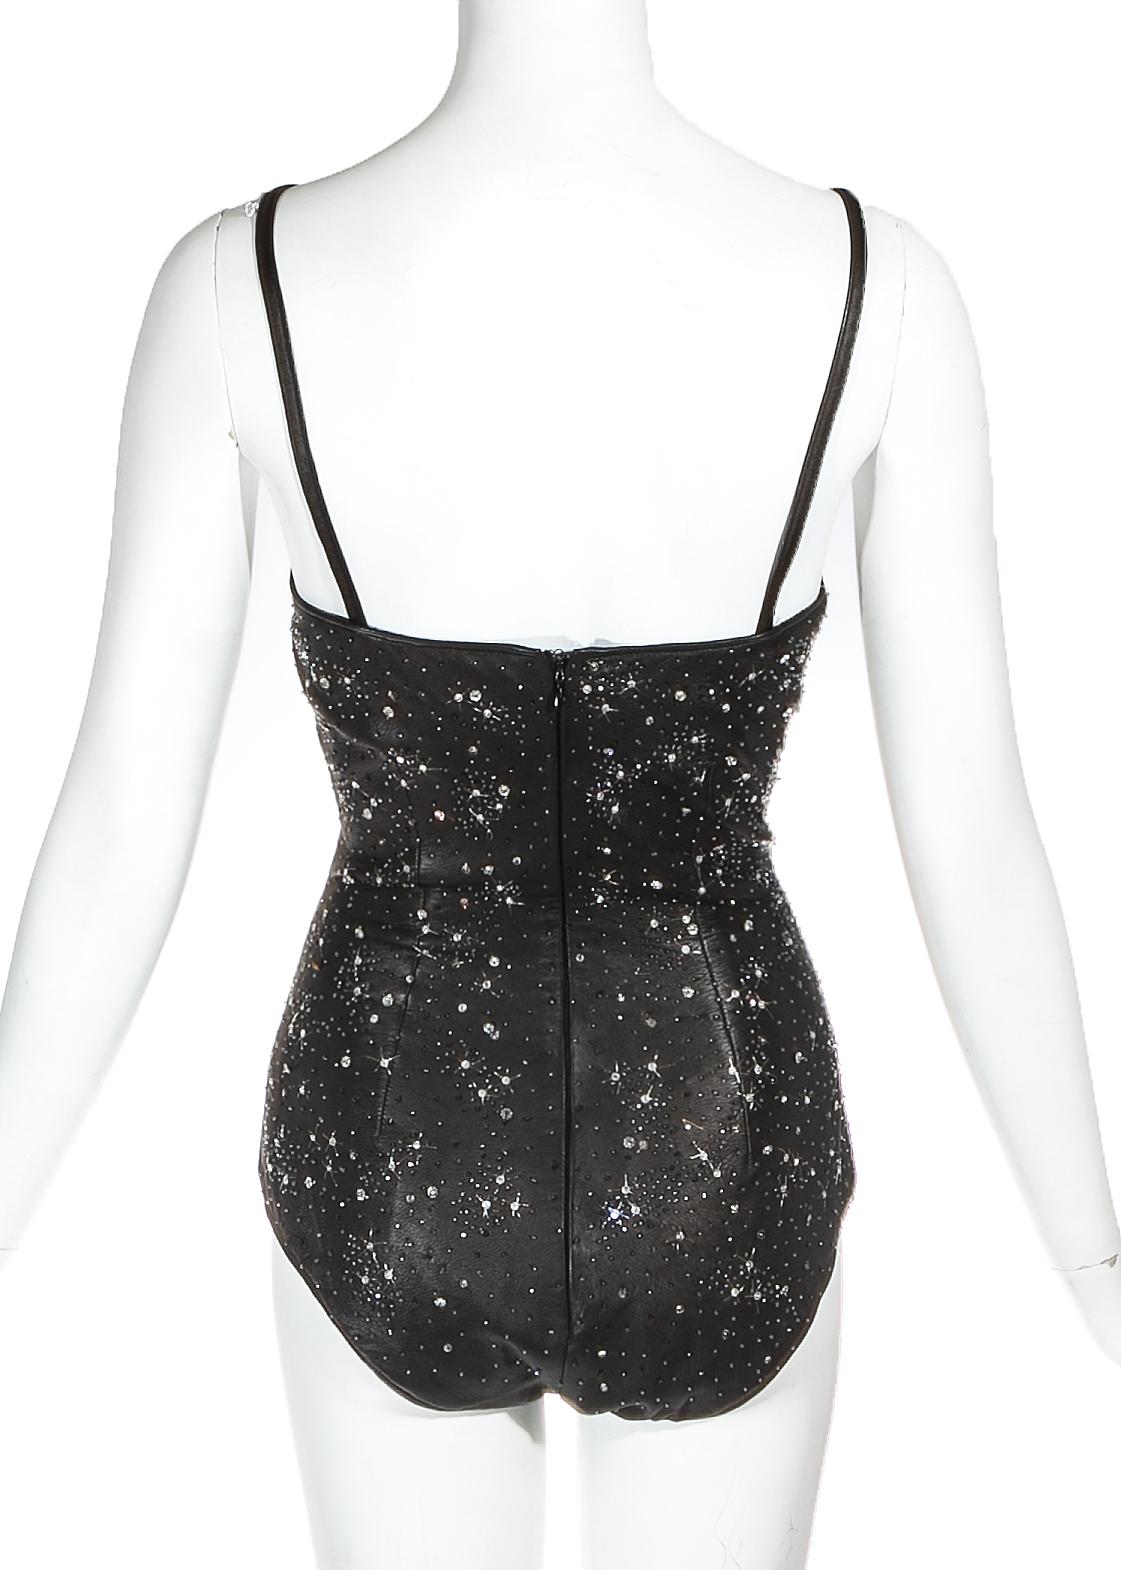 Gianni Versace black leather embellished bodysuit, S/S 1998 In Excellent Condition For Sale In London, GB